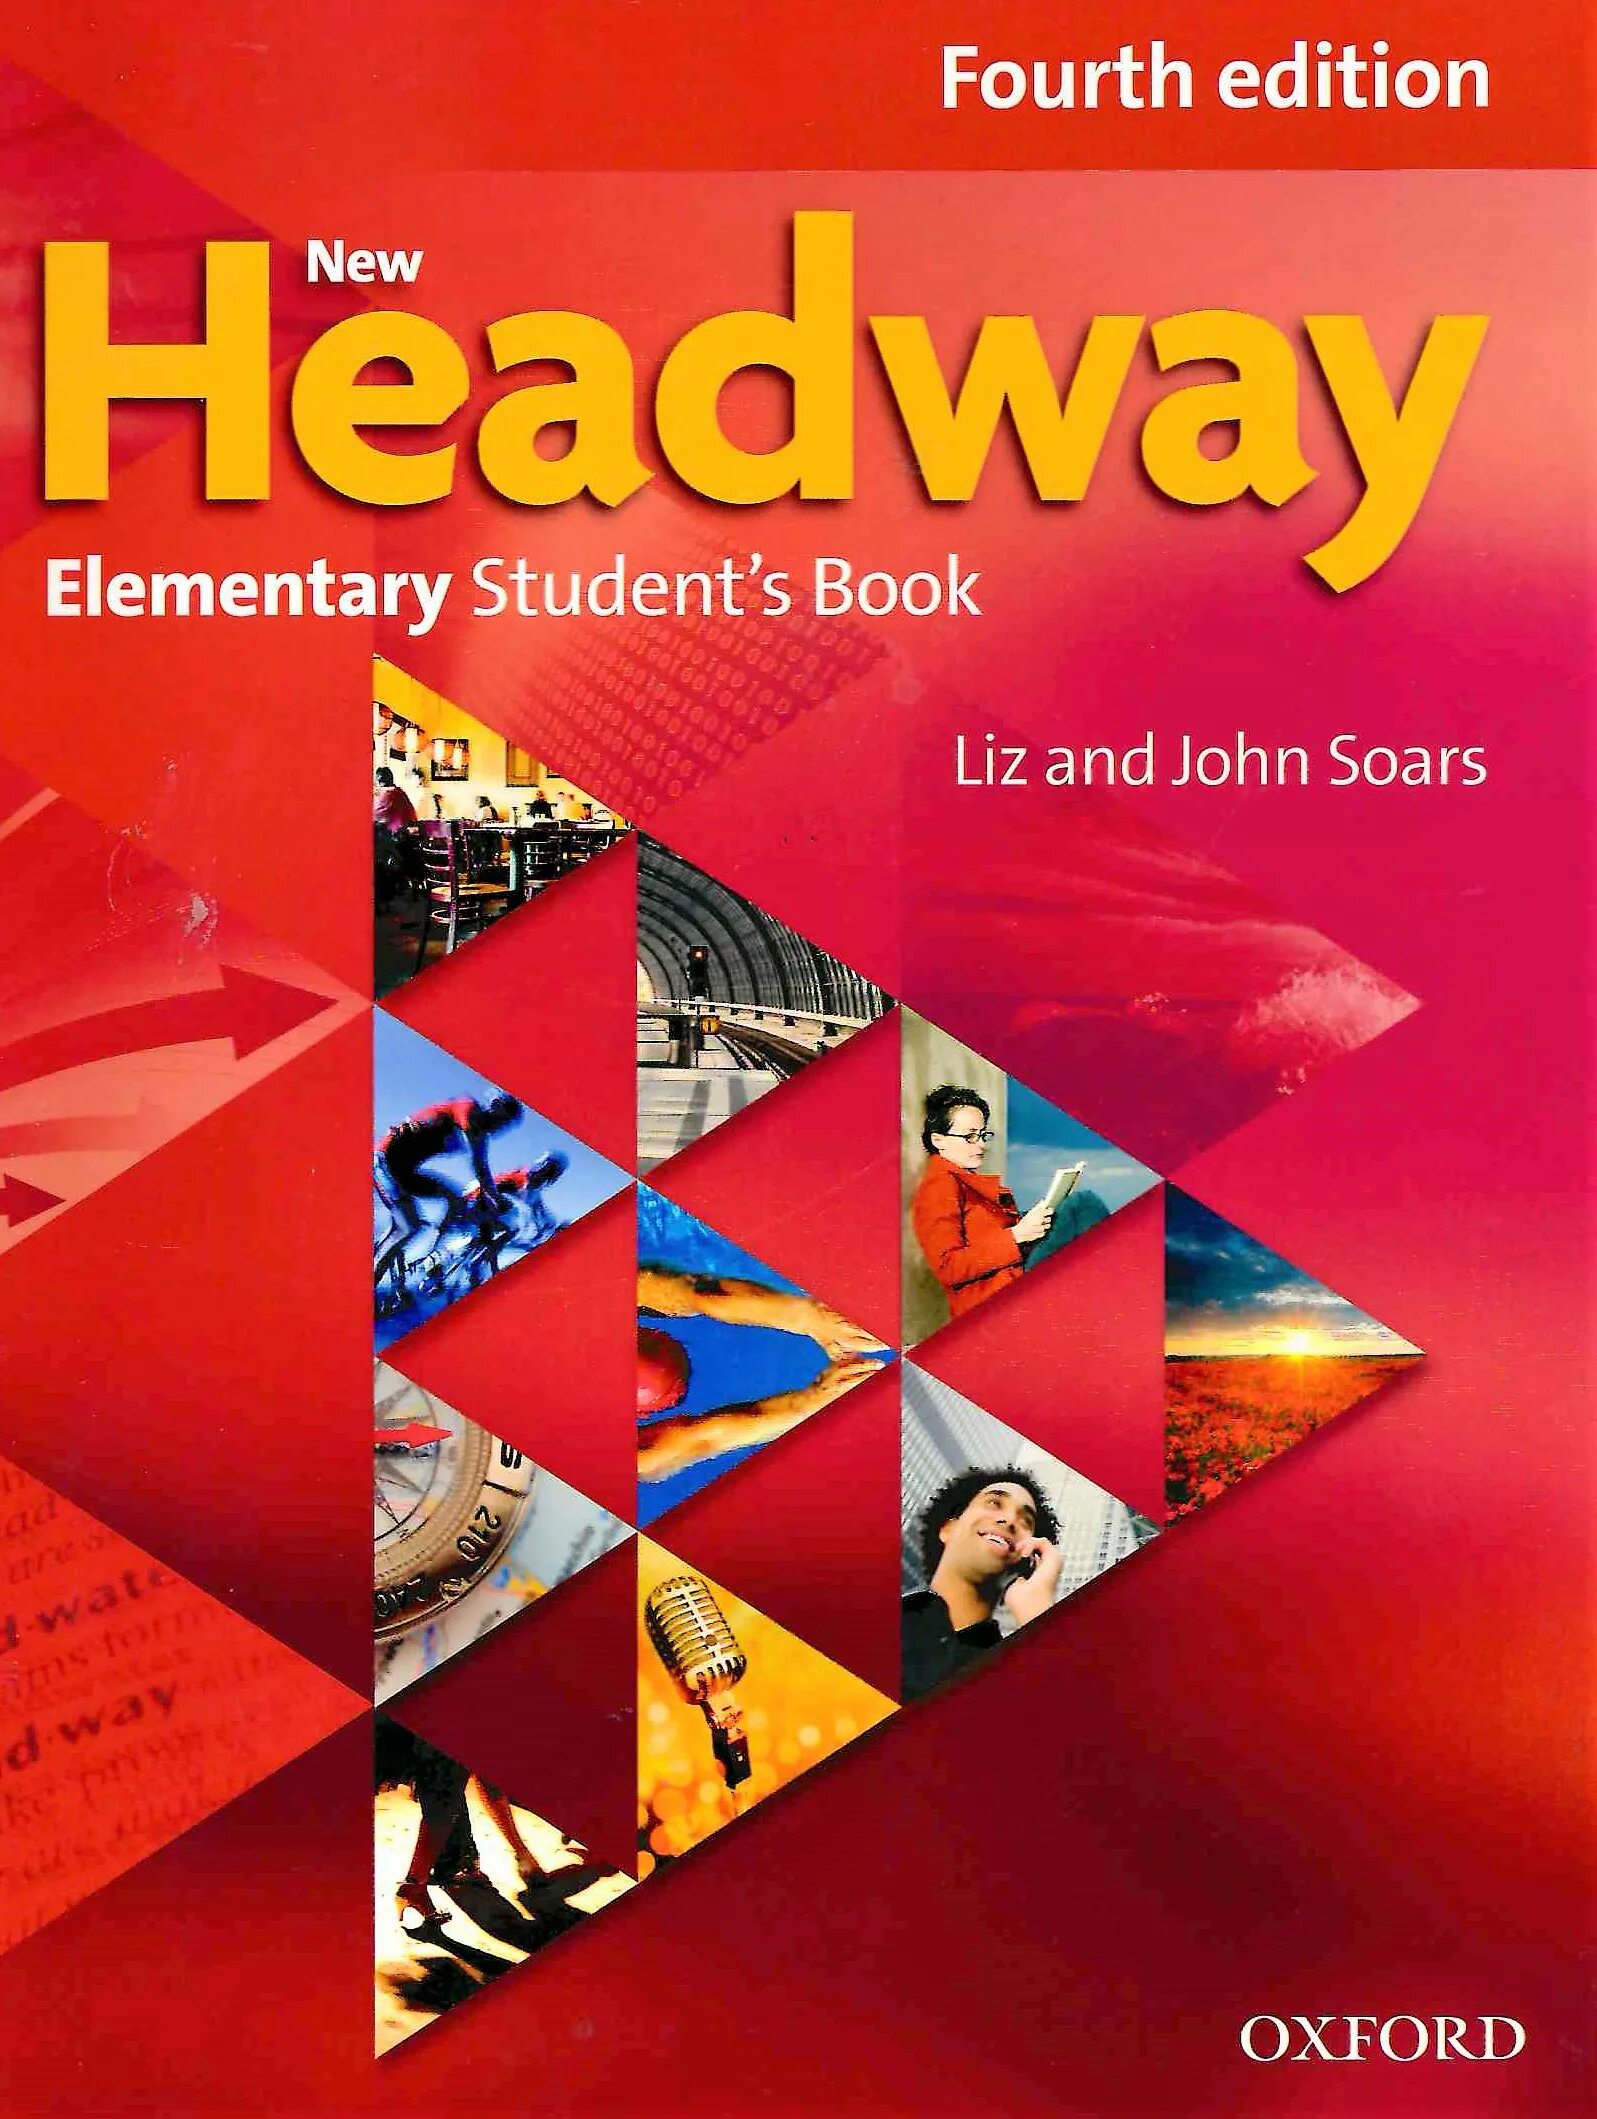 New Headway Elementary 3rd Edition. New Headway Beginner 4th Edition. New Headway Elementary Audio 4th Edition. New Headway Elementary 4th Edition. Pdf student books elementary